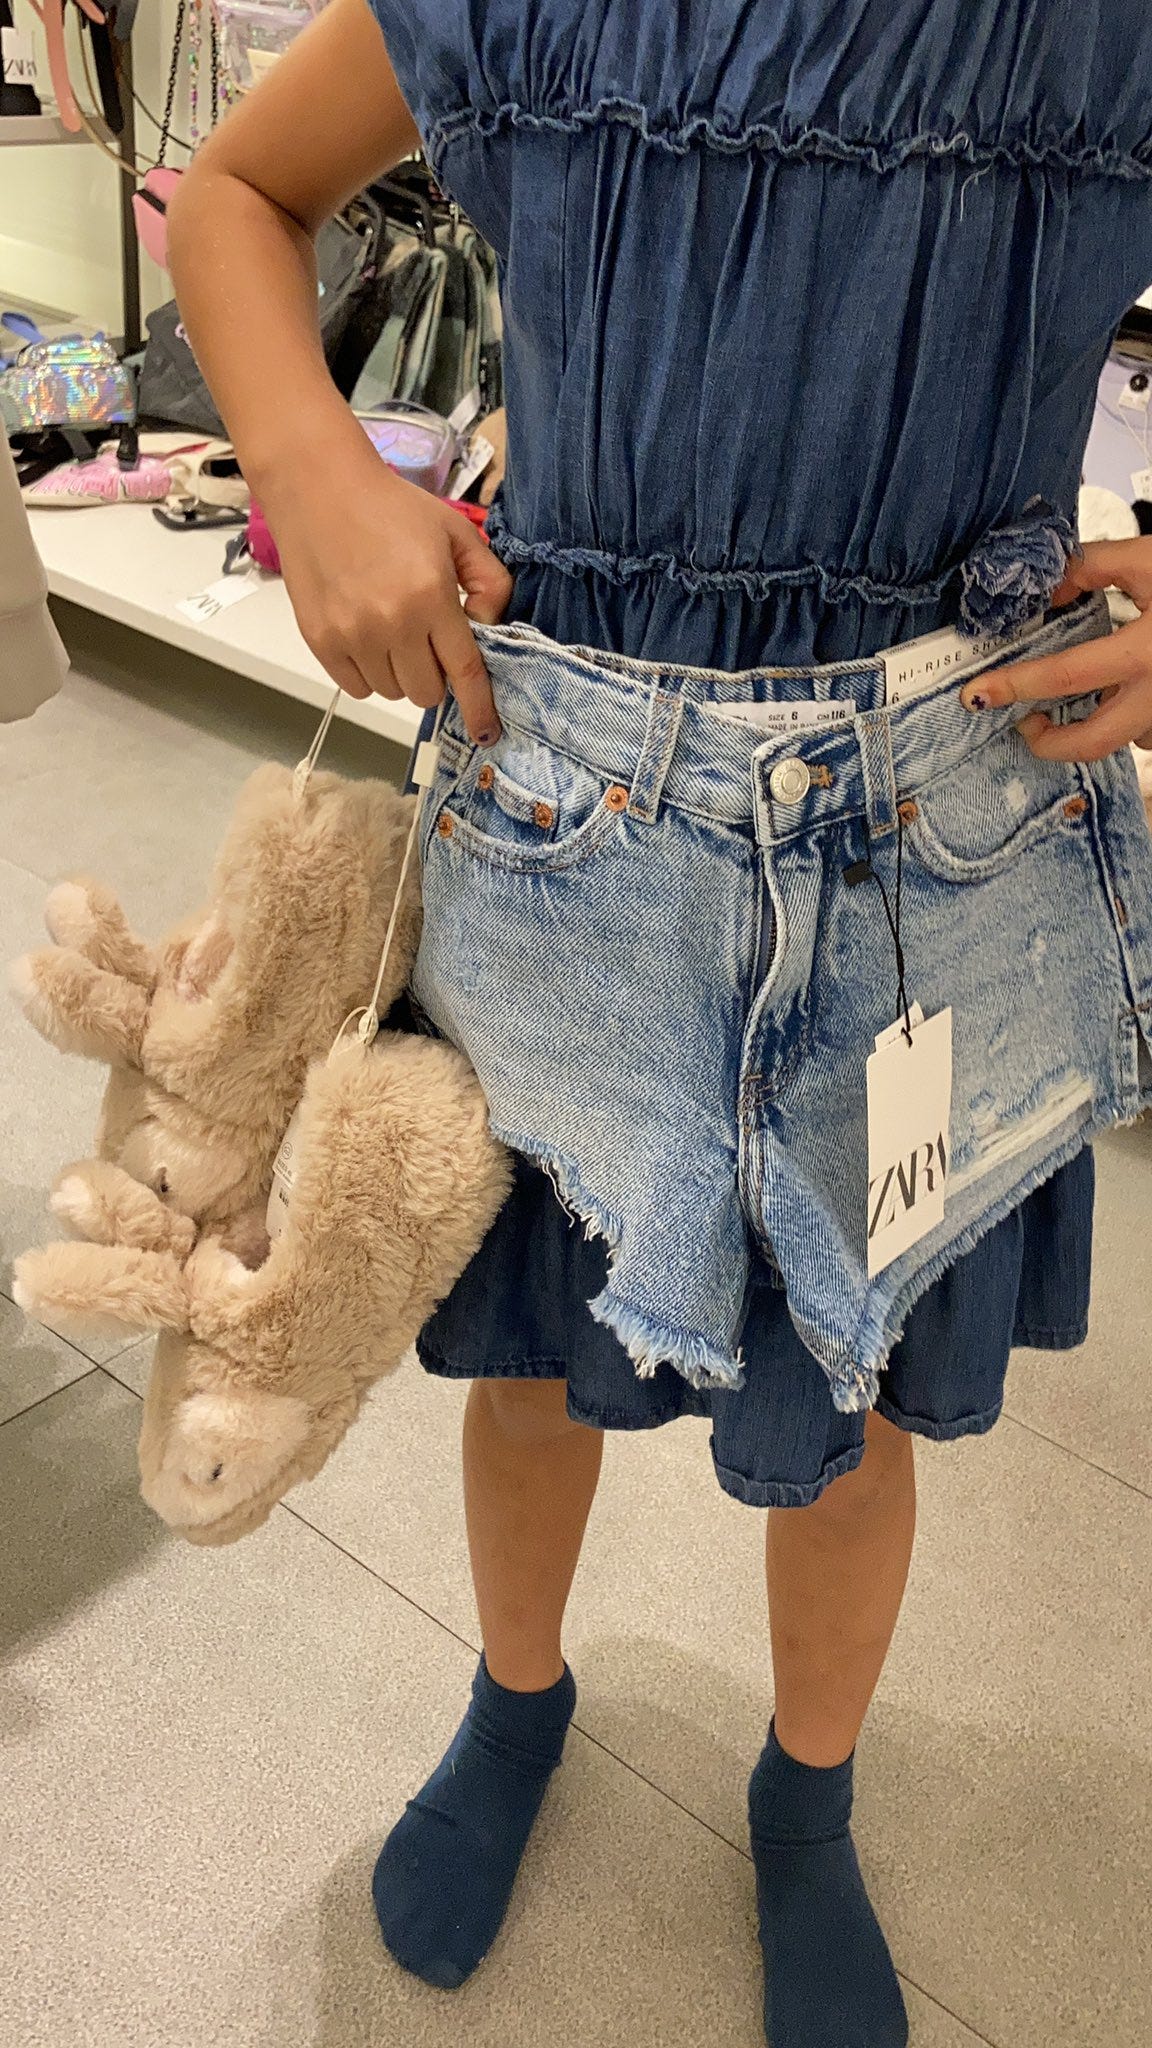 Dugter Rape In Hard Hd Cute - Balenciaga and other brands need to stop sexualizing children